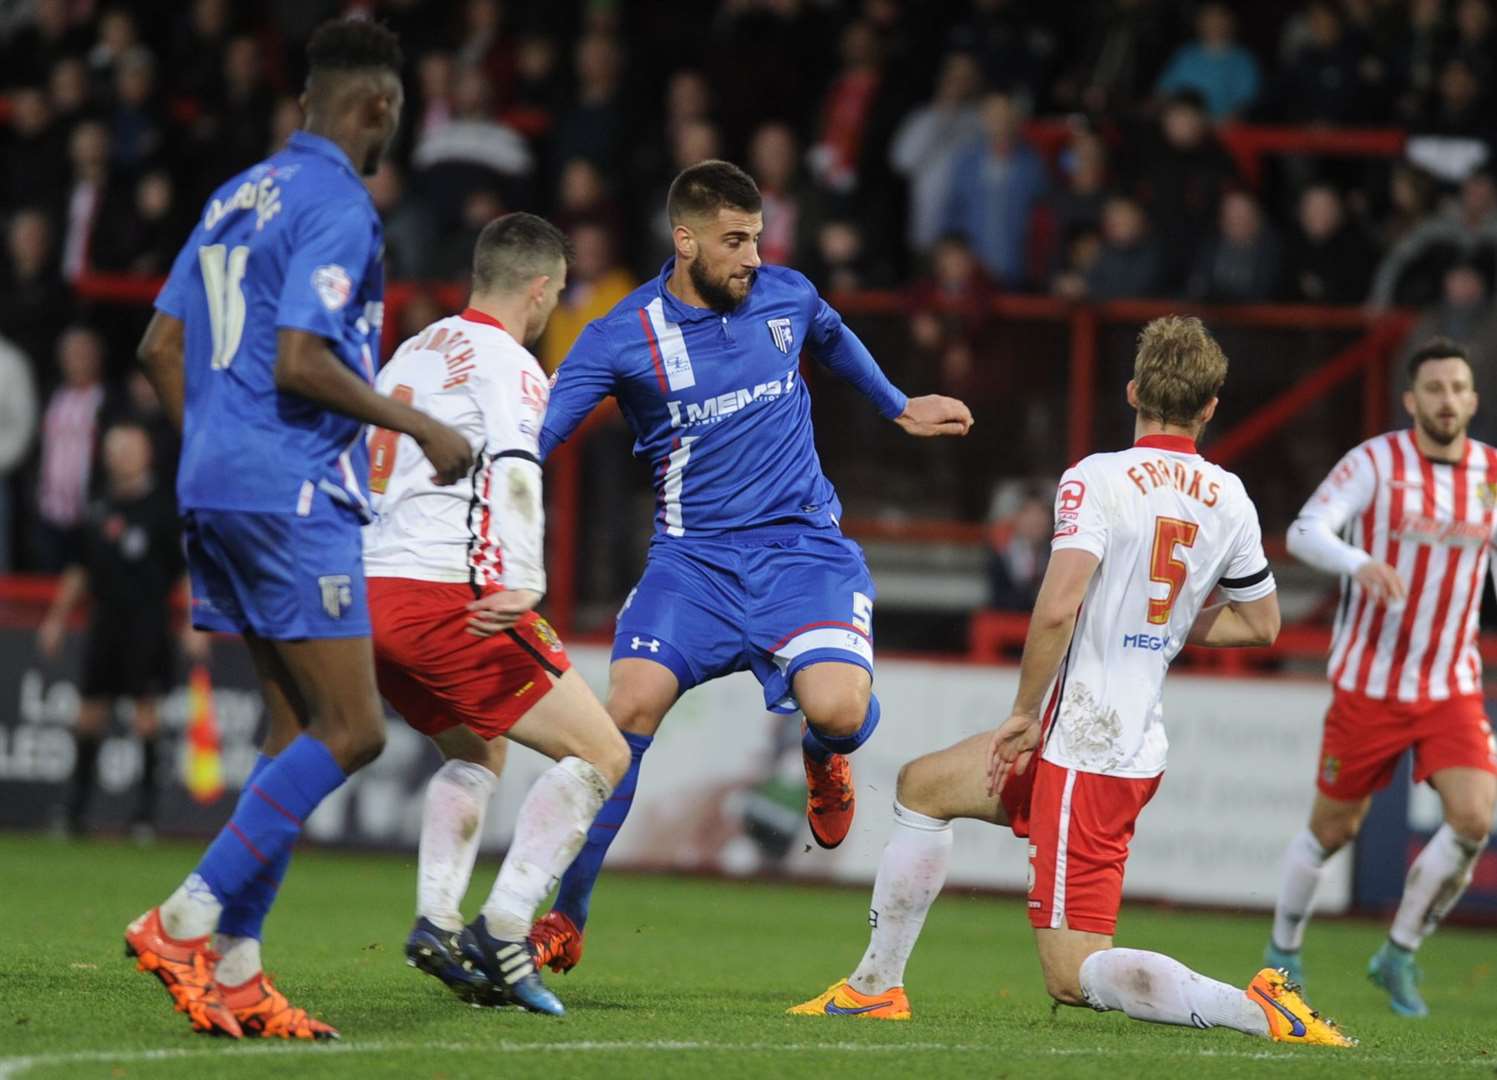 Max Ehmer up against Stevenage during an FA Cup game in 2015 Picture: Barry Goodwin